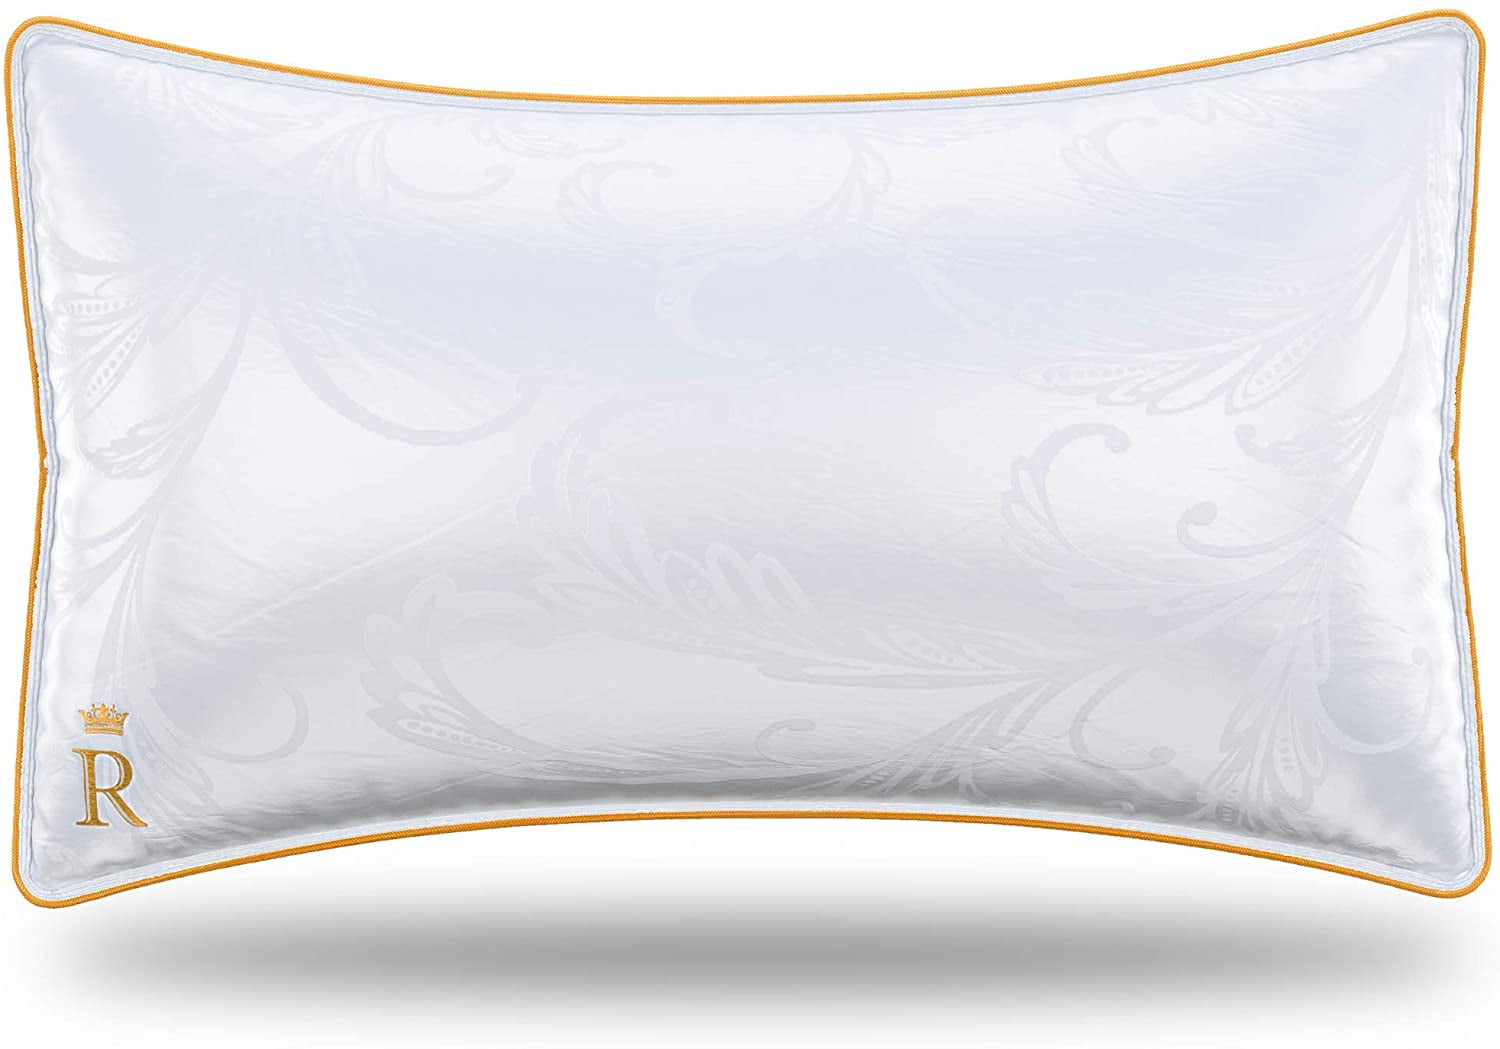 2-Pack ROYAL THERAPY Standard-Size Professional Hotel Pillows 